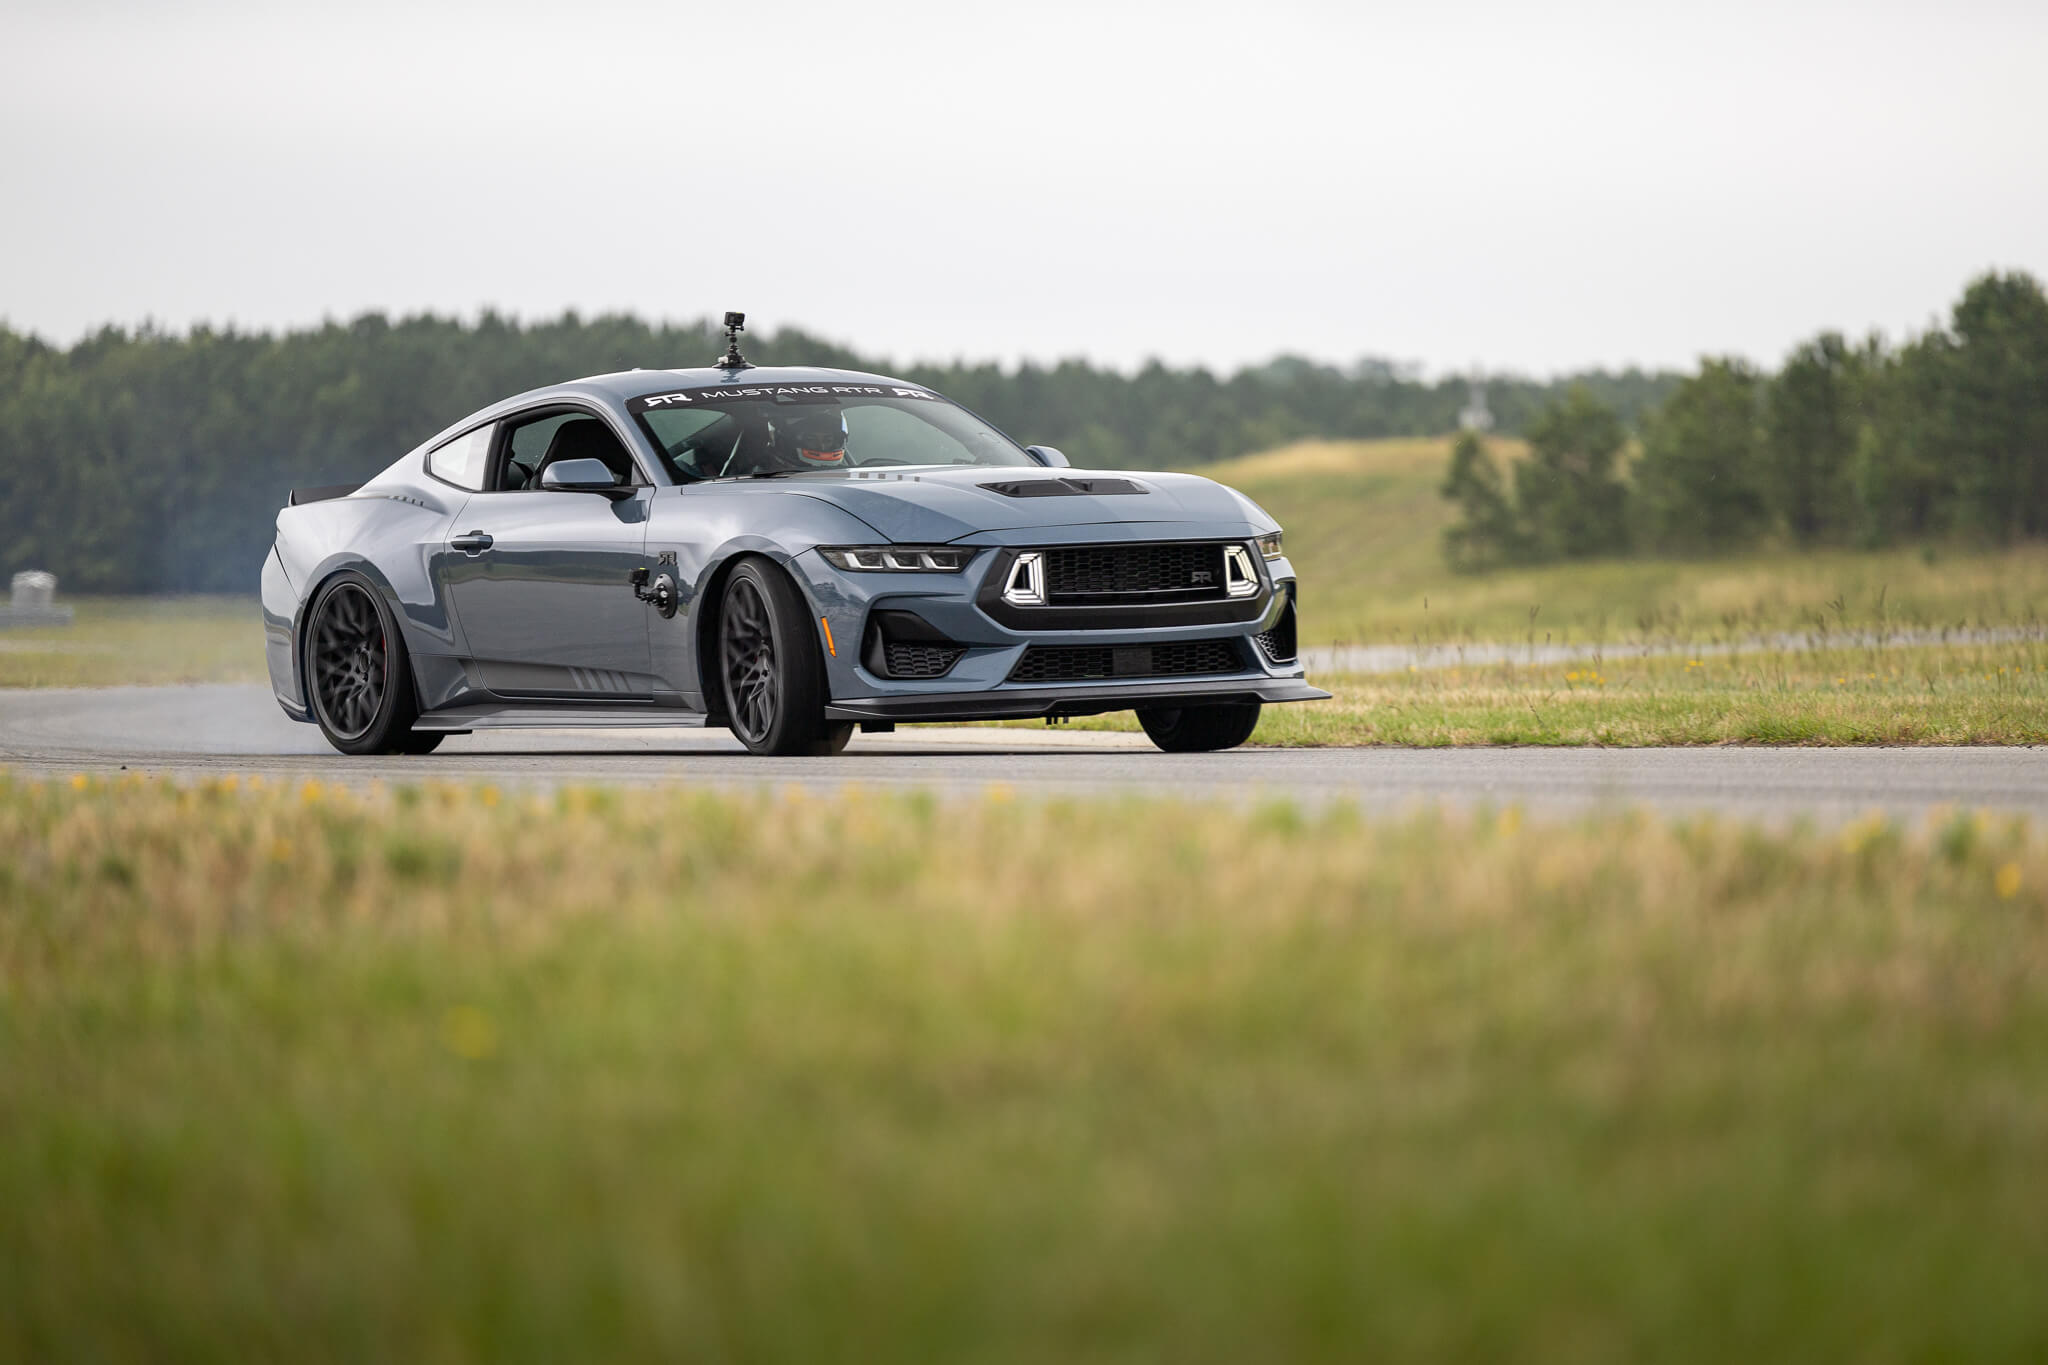 S650 Mustang RTR Vehicles Suspension Validation Testing on the 7th Generation Mustang JCOL4803-2